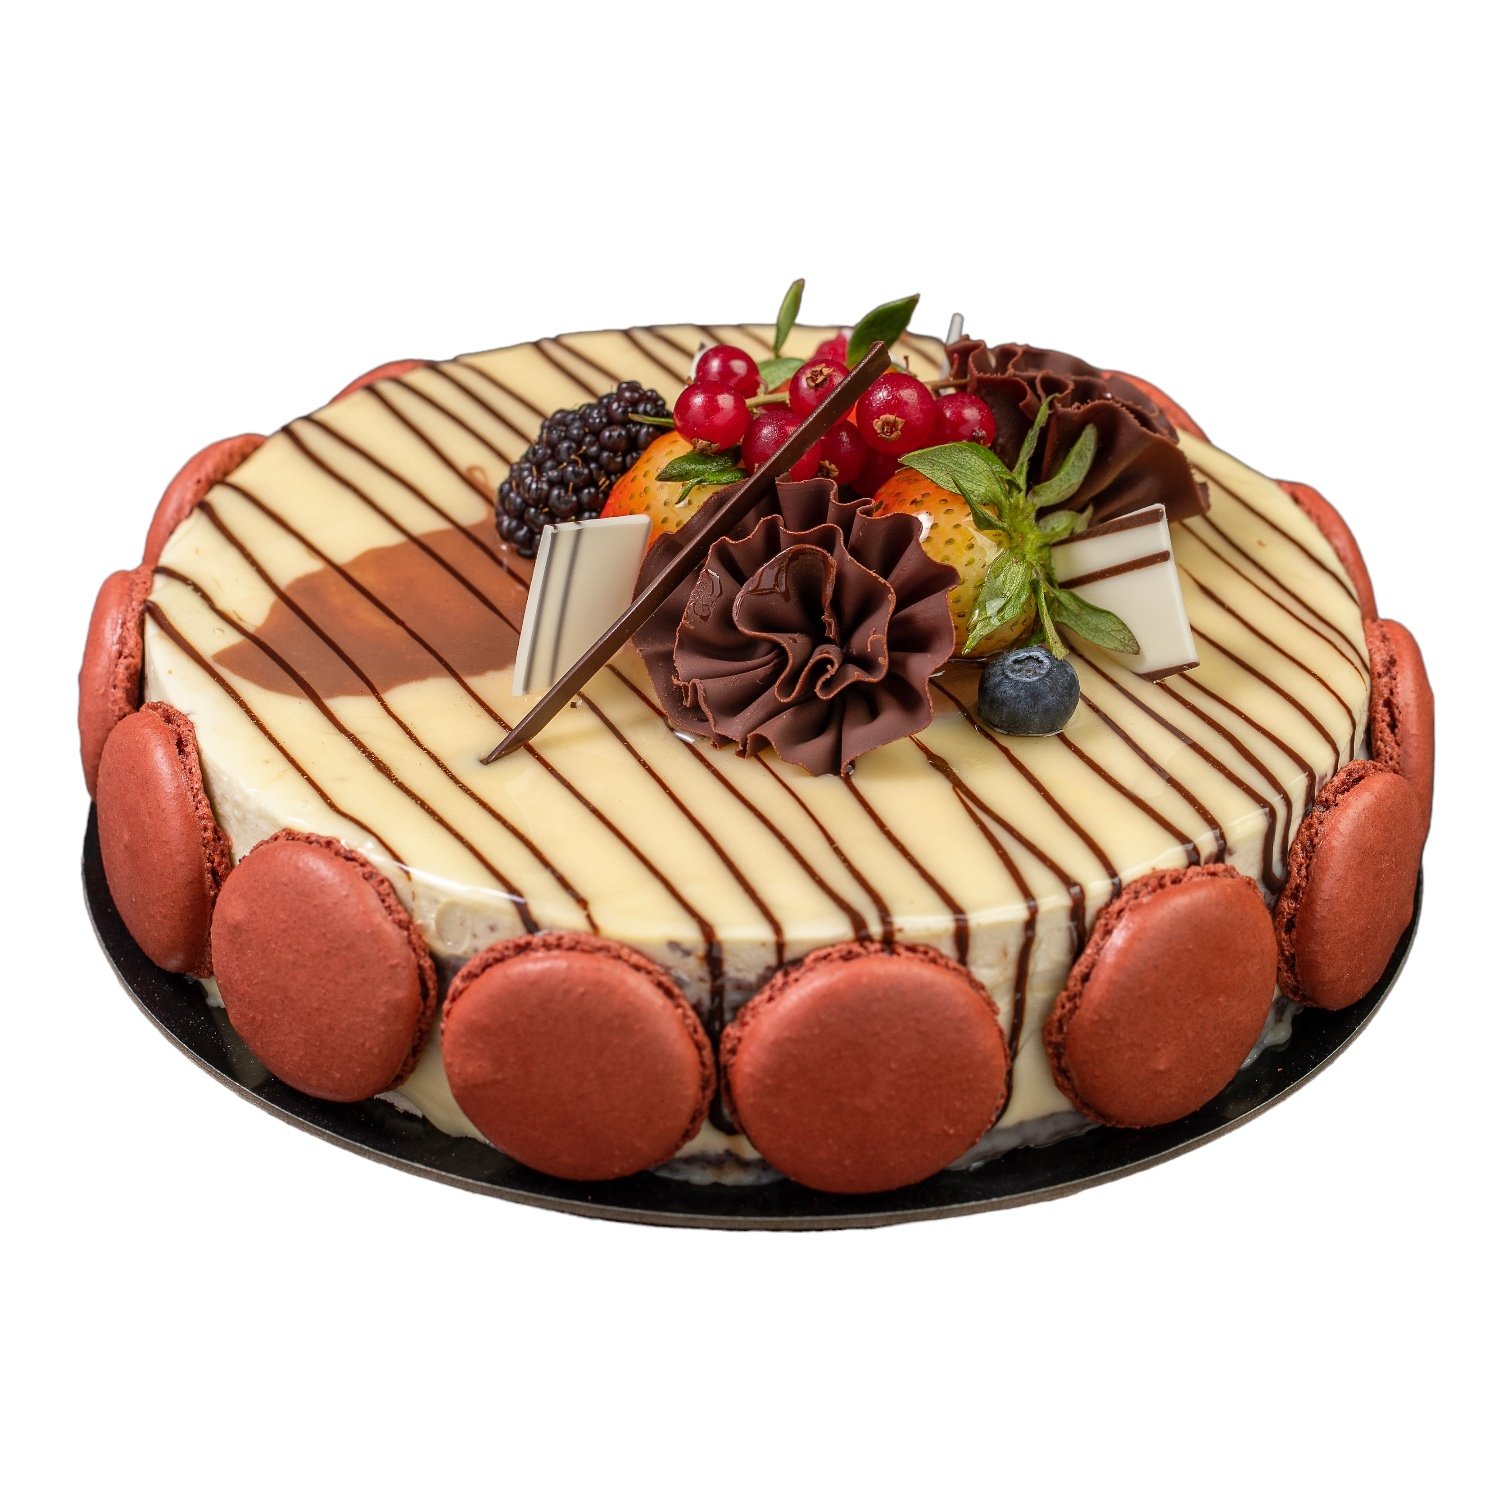 The Best Cake Shops in Abu Dhabi The Best Cake Shops in Abu Dhabi